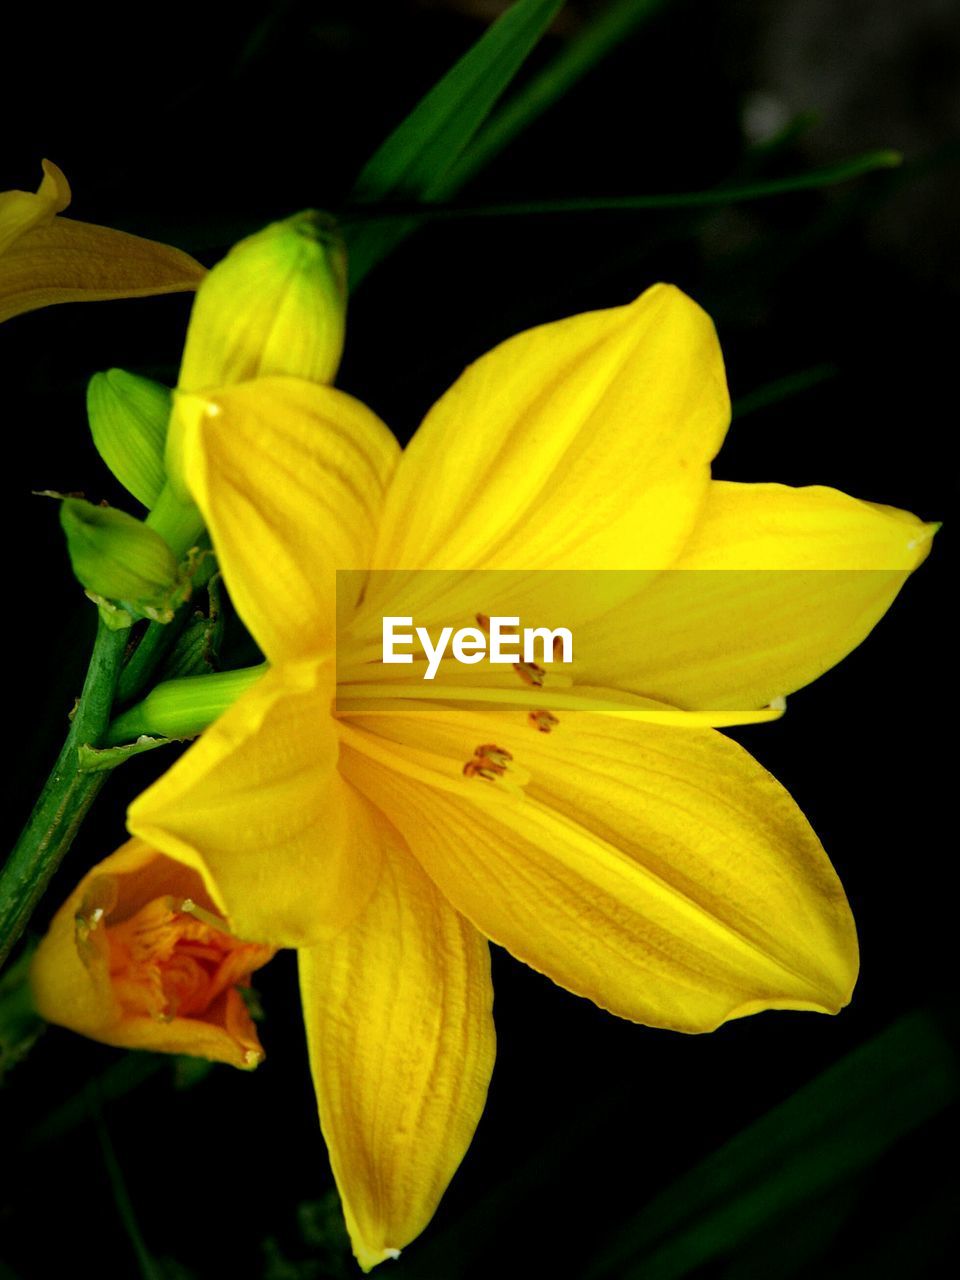 CLOSE-UP OF YELLOW LILY BLOOMING OUTDOORS